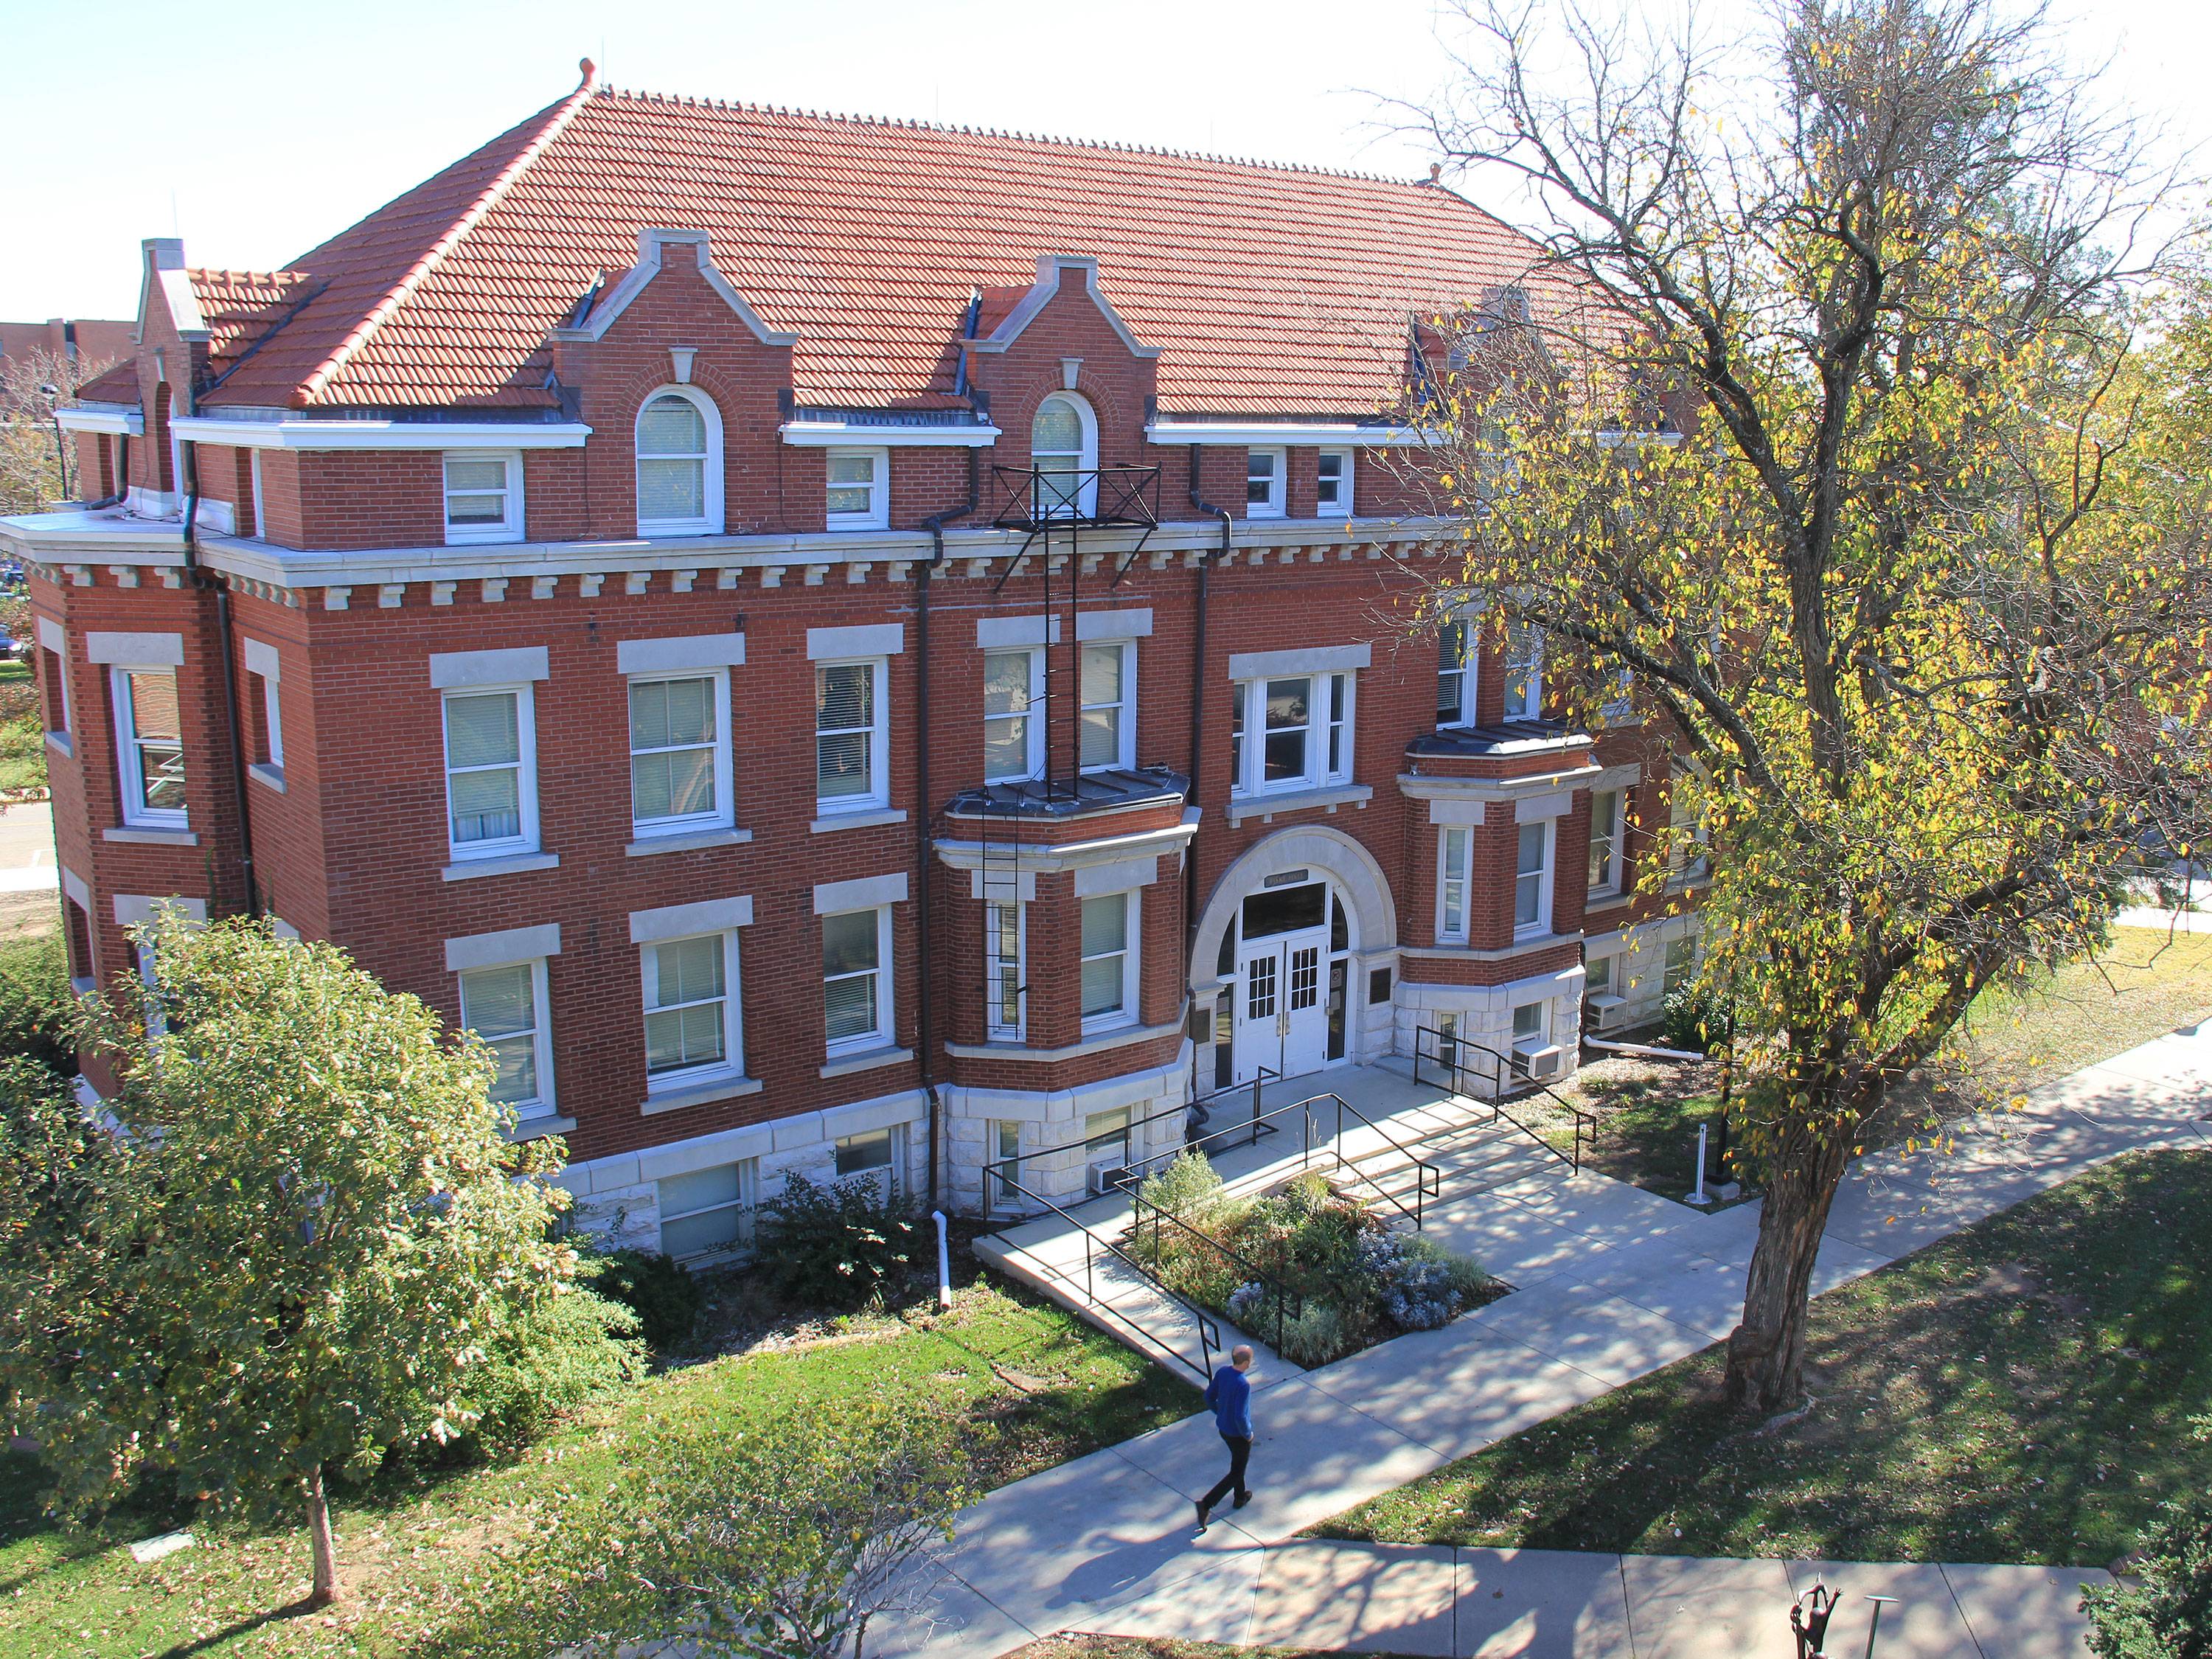 Fiske Hall, a brick and stone building dedicated in 1906